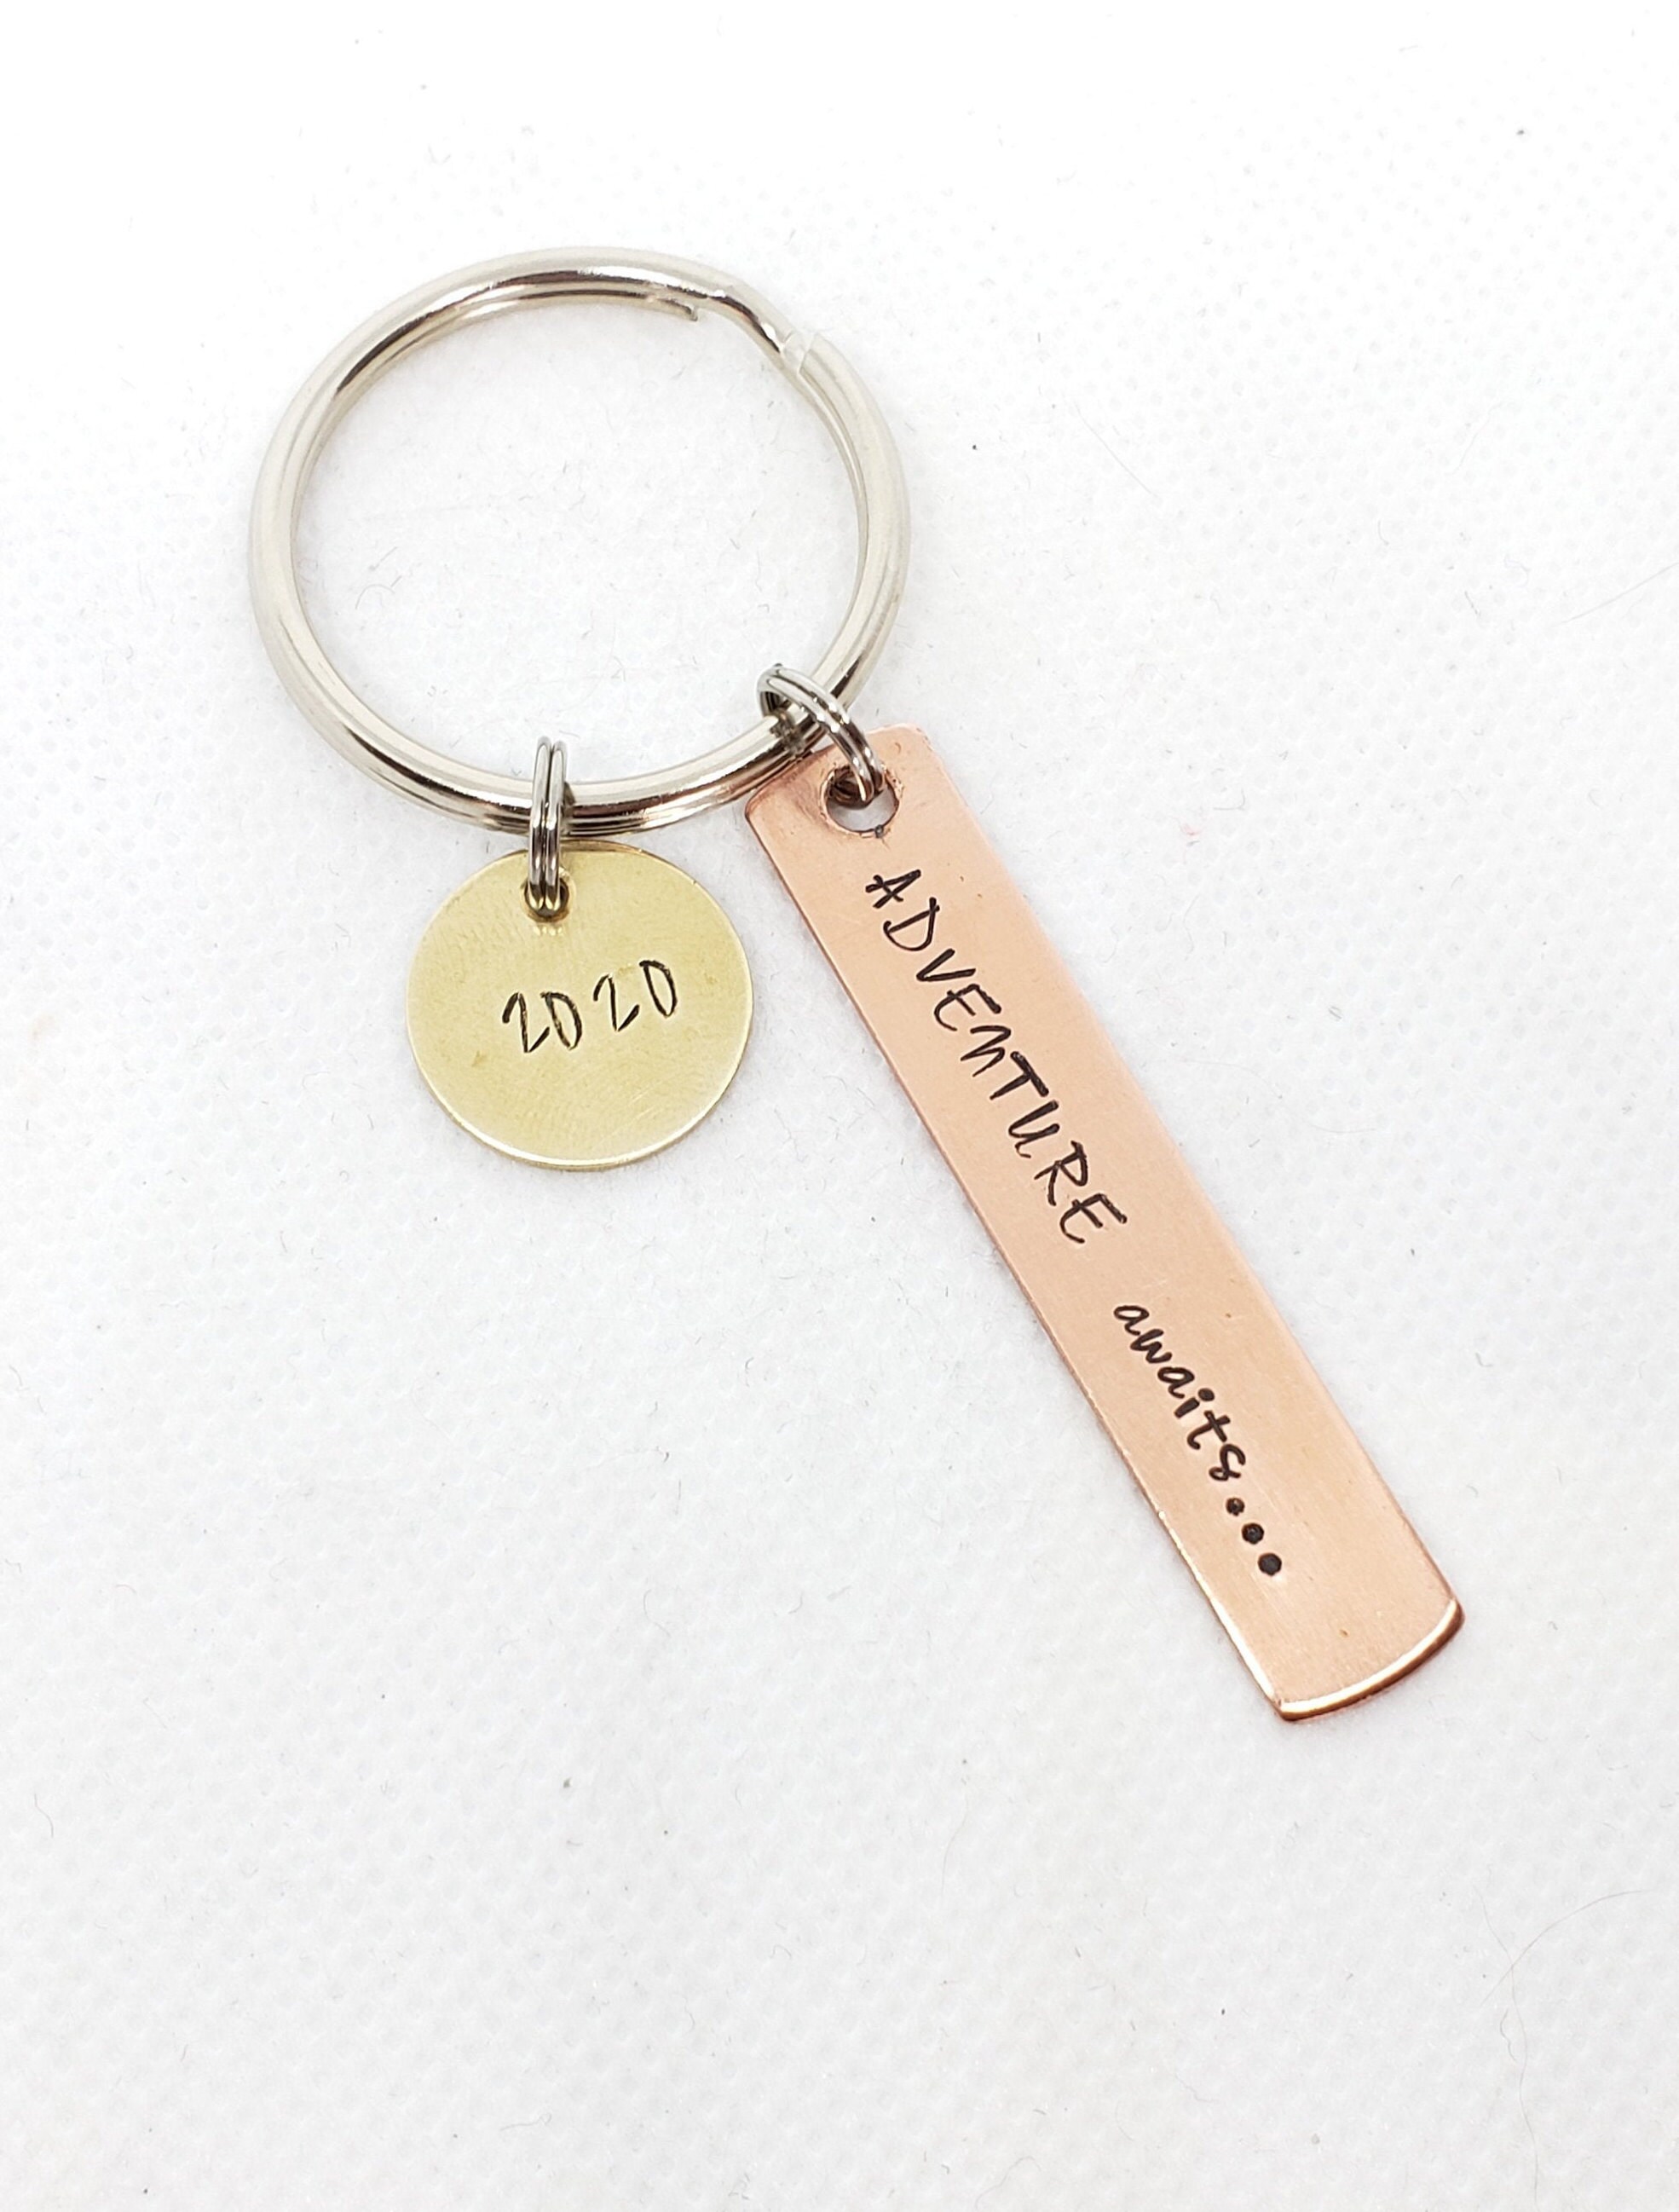 Adventure Awaits Bible Verse Keychain Charms Inspirational Traveler Key For  Friends Perfect Graduation Gift And Long Journey To Climbing Mountain G1019  From Catherine010, $1.94